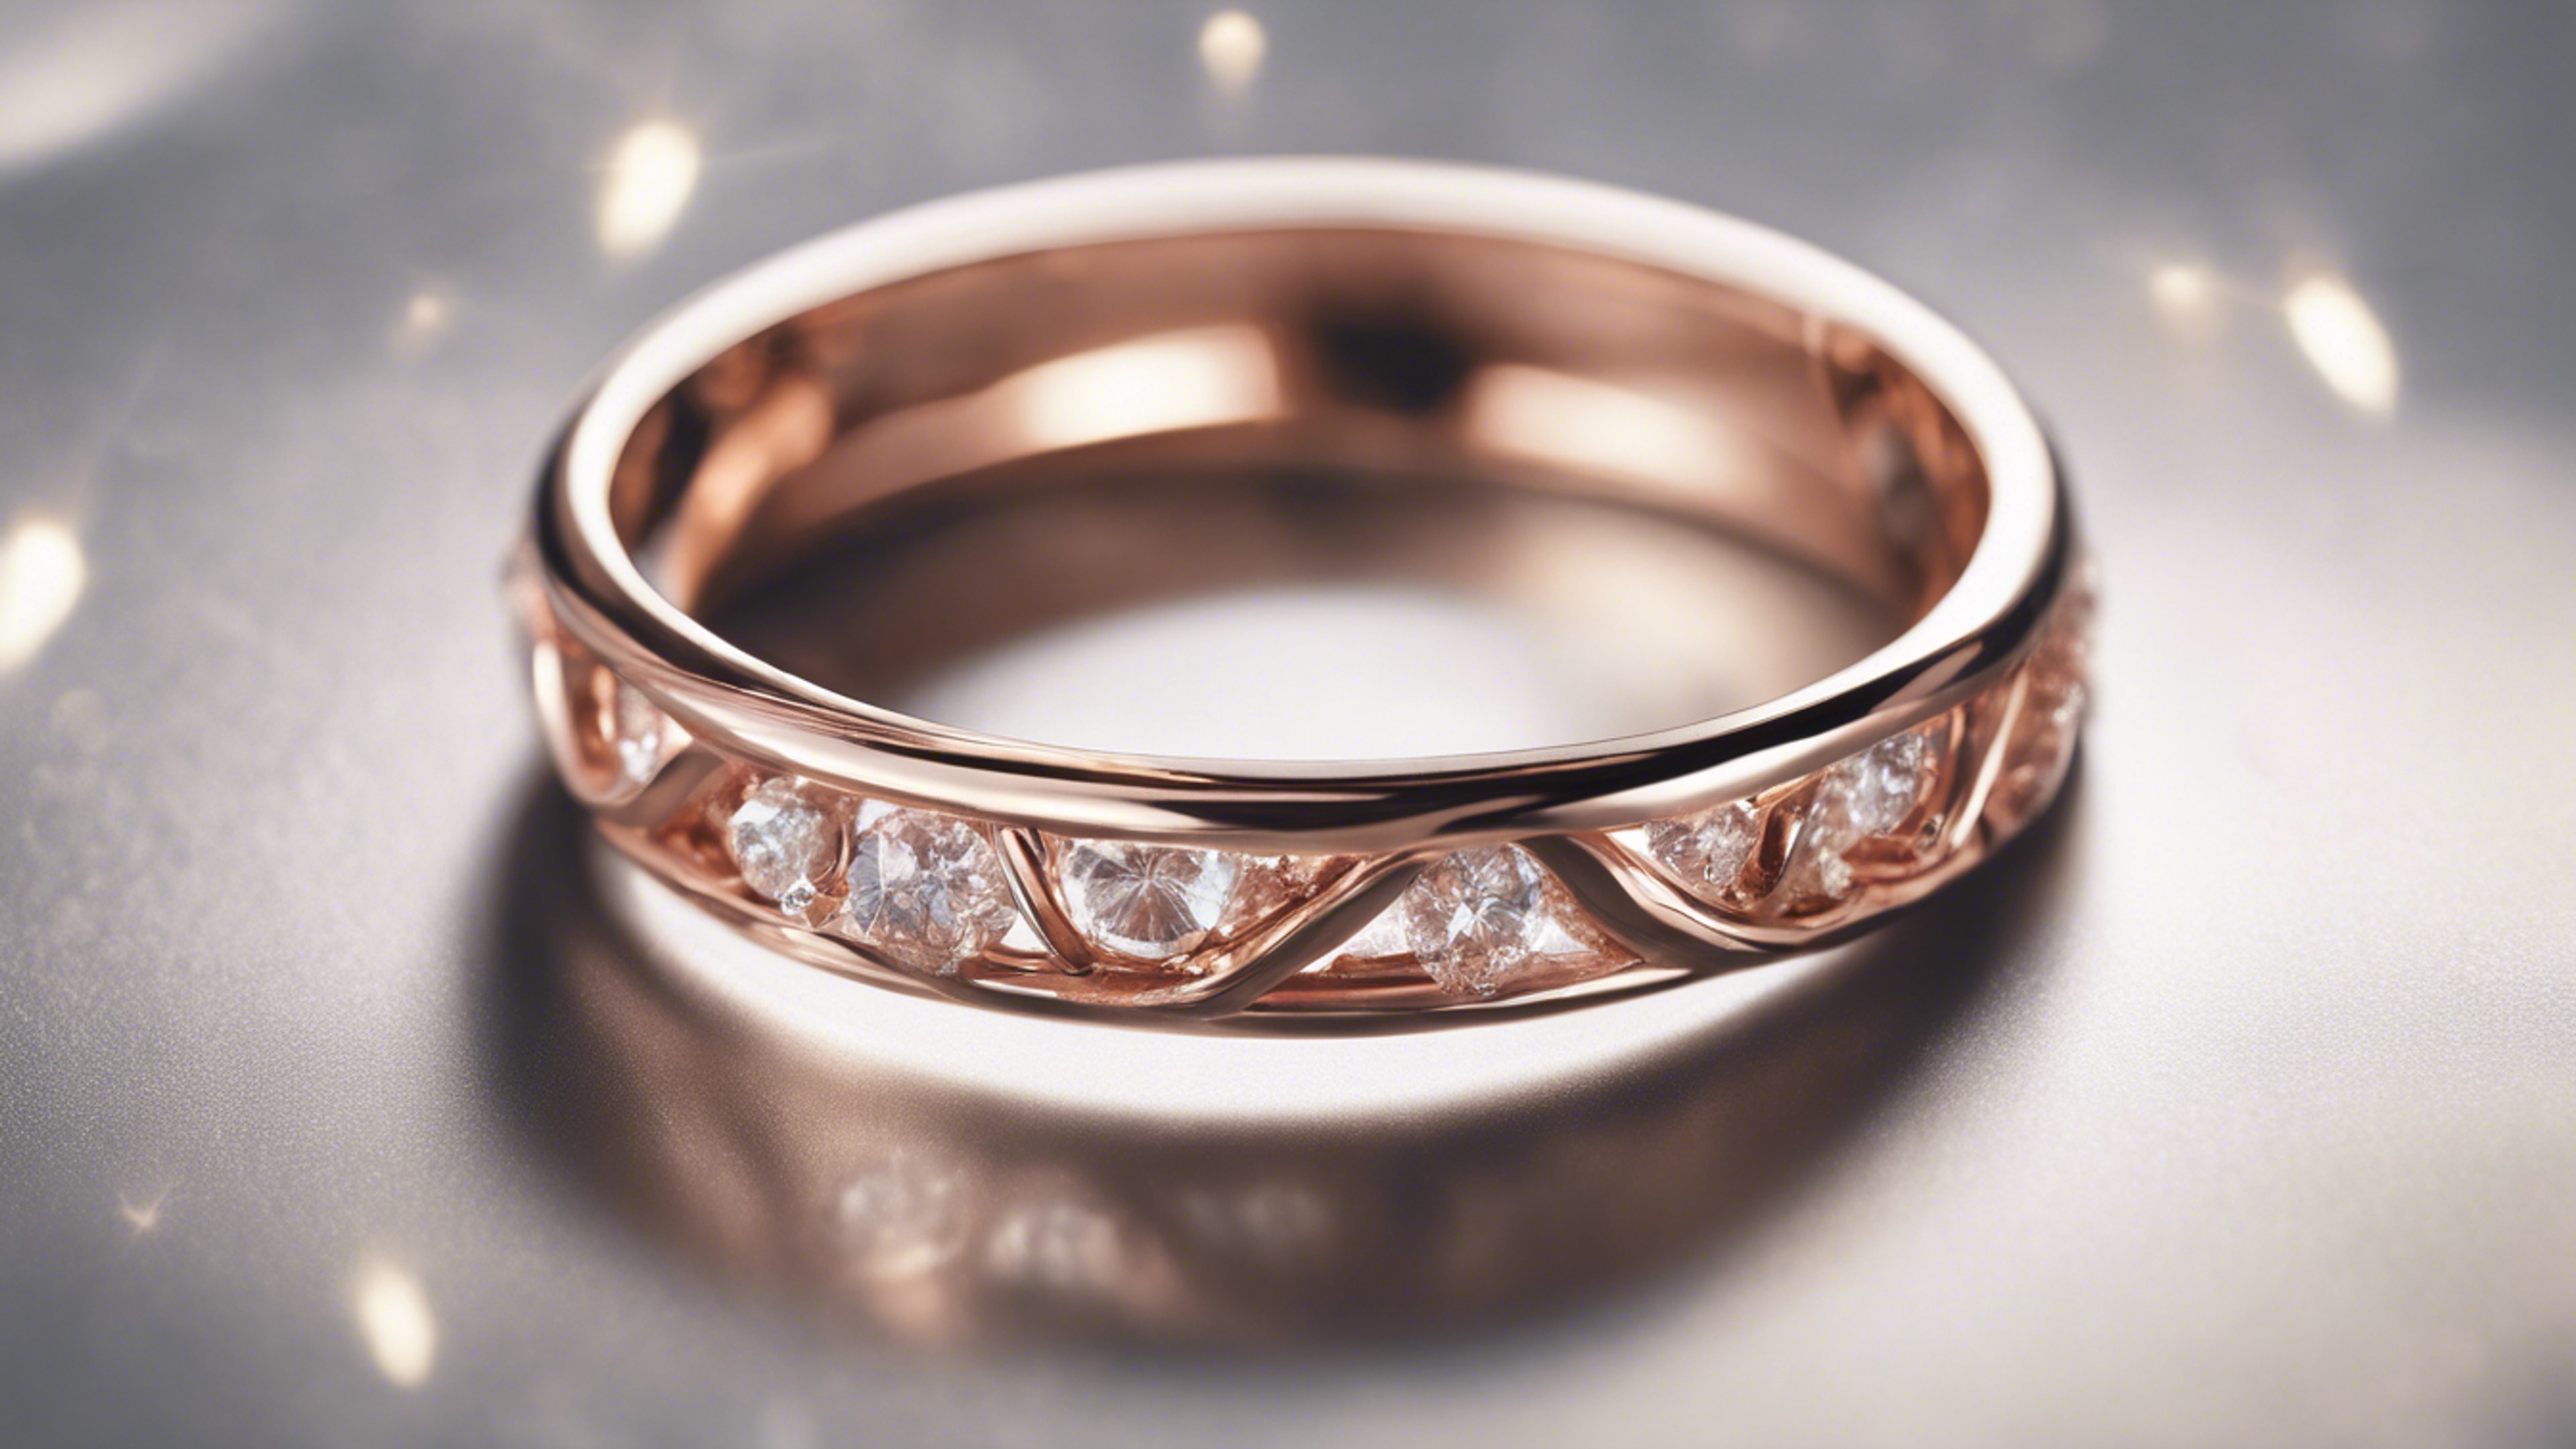 A close-up of a shiny, wing-designed rose gold ring on a ring display.壁紙[e81f1852b98946d98654]